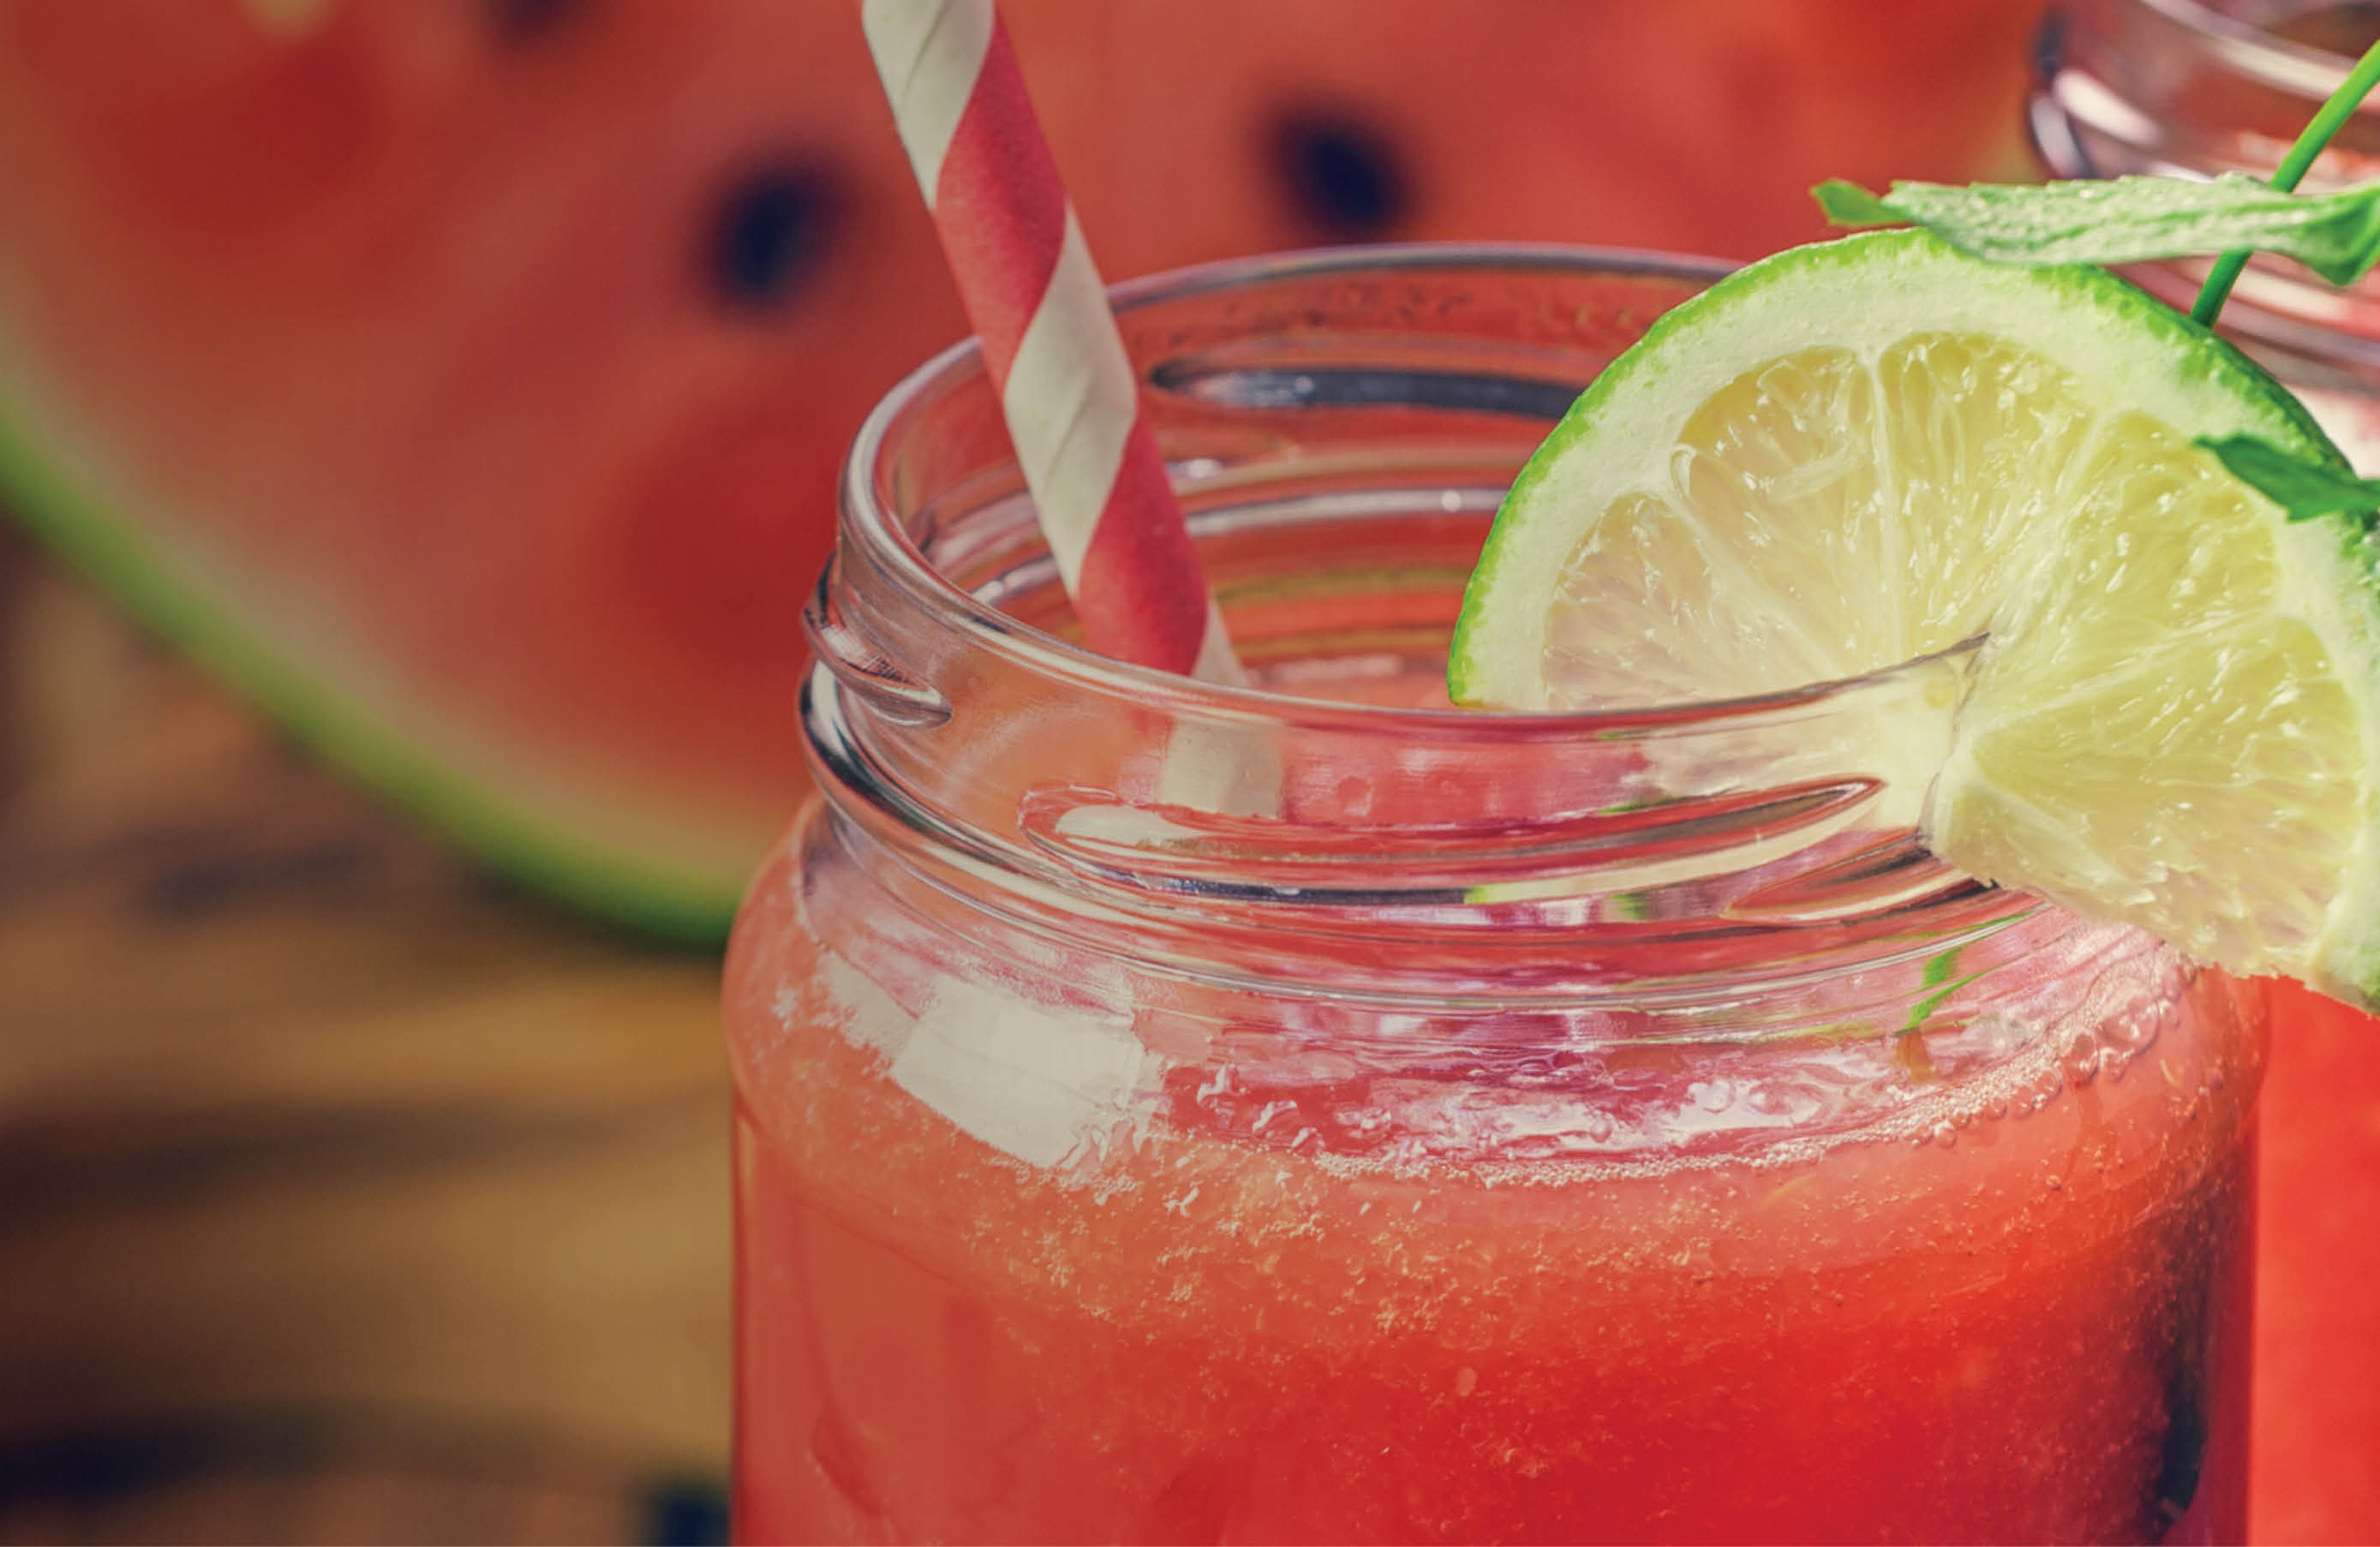 Celebrate Cinco de Mayo with this Traditional Mexican Mocktail